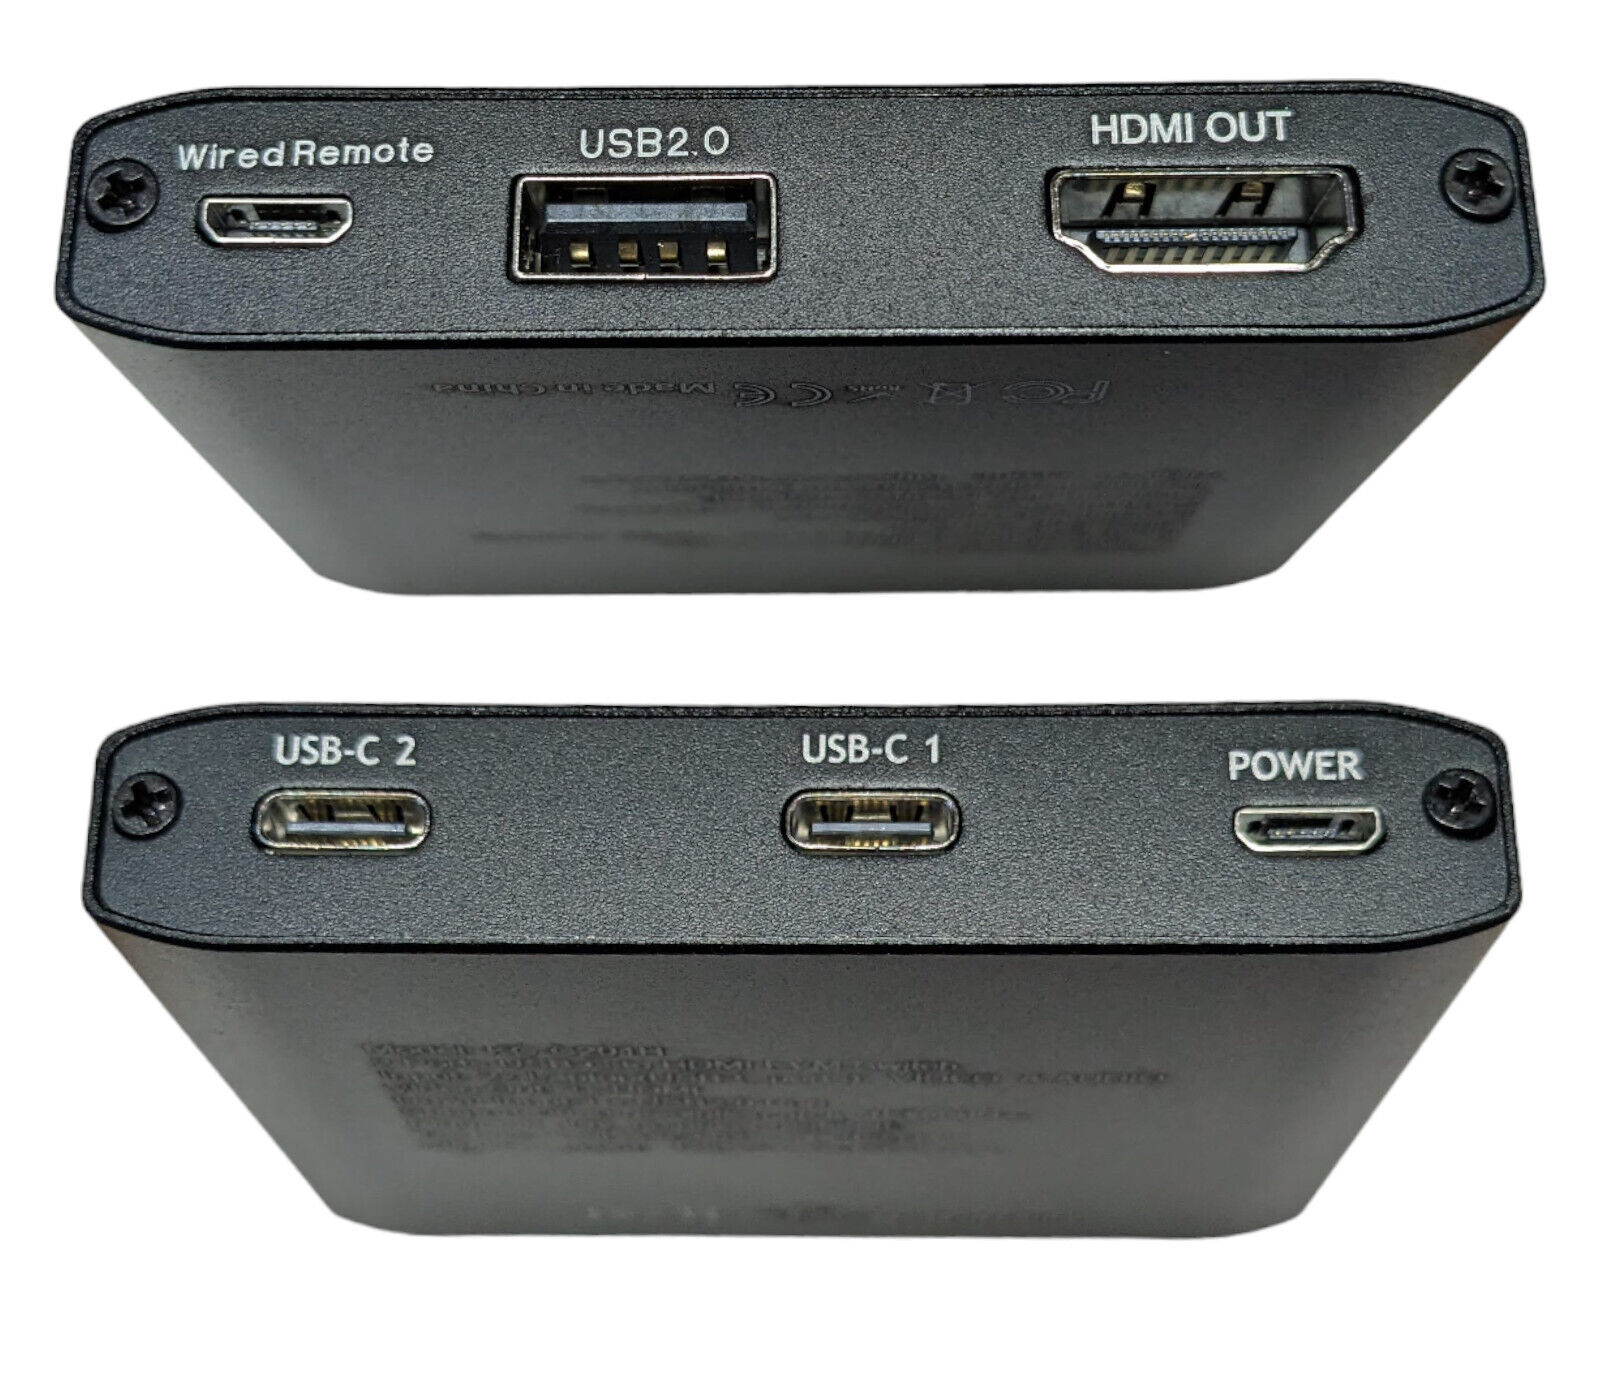 Kceve USB C Switch 2 in 1 Out or 1 in 2 Out, Type-C Bidirectional Switcher